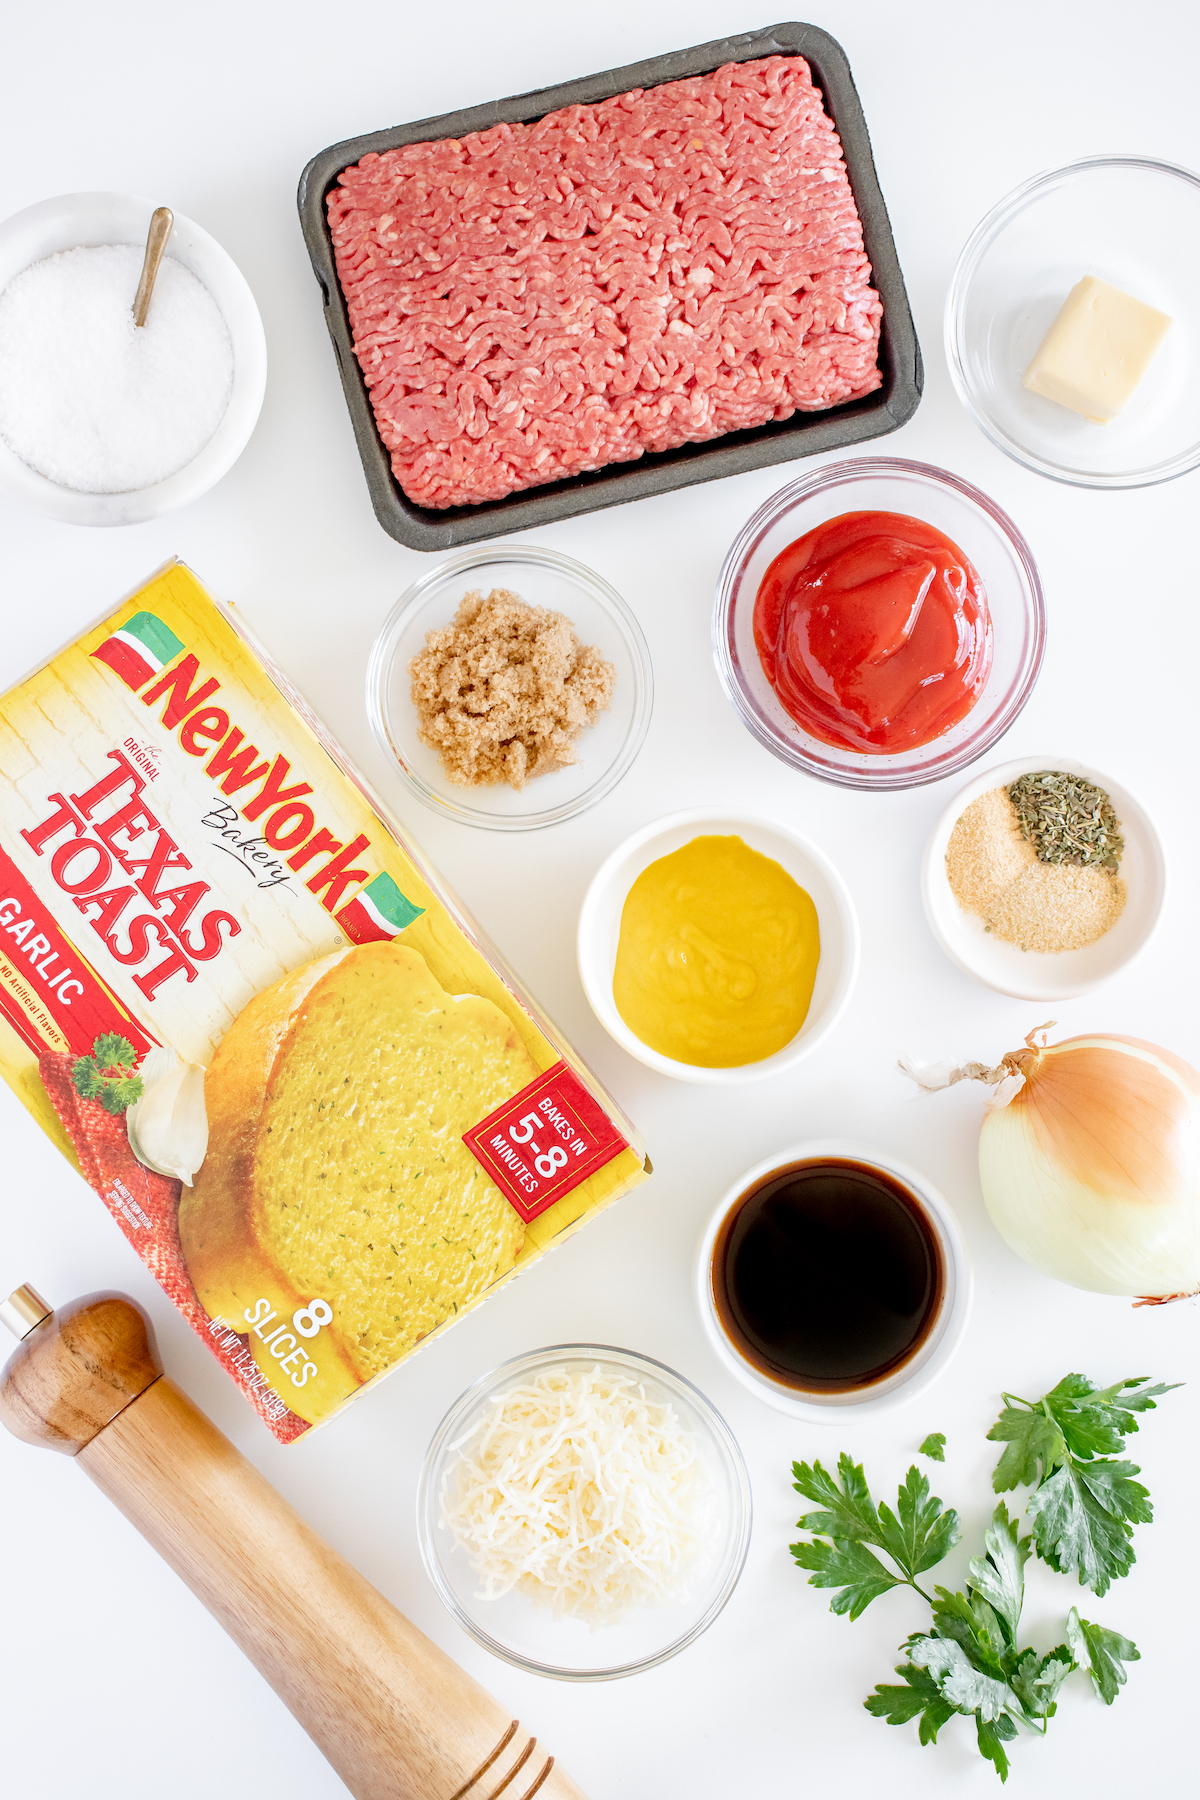 All the ingredients needed to make Texas Toast Sloppy Joes in prep bowls on a white background.